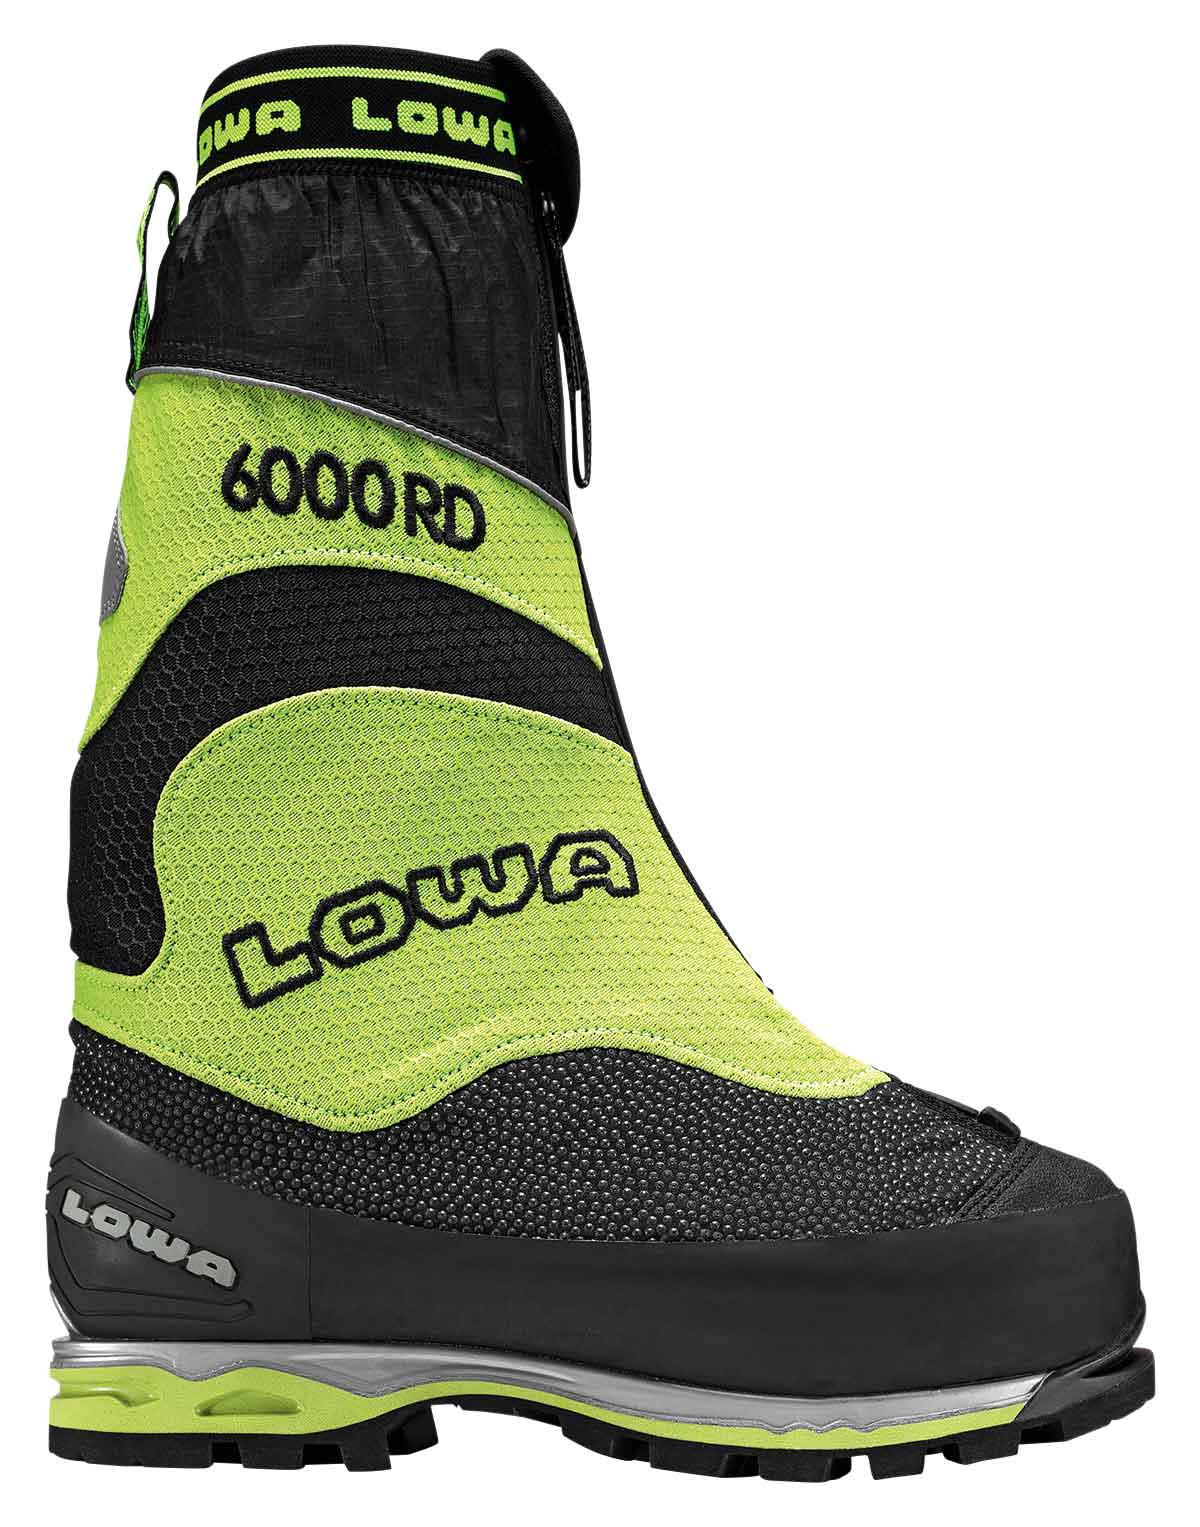 Lowa Expedition 6000 Evo RD - Mountaineering Boots